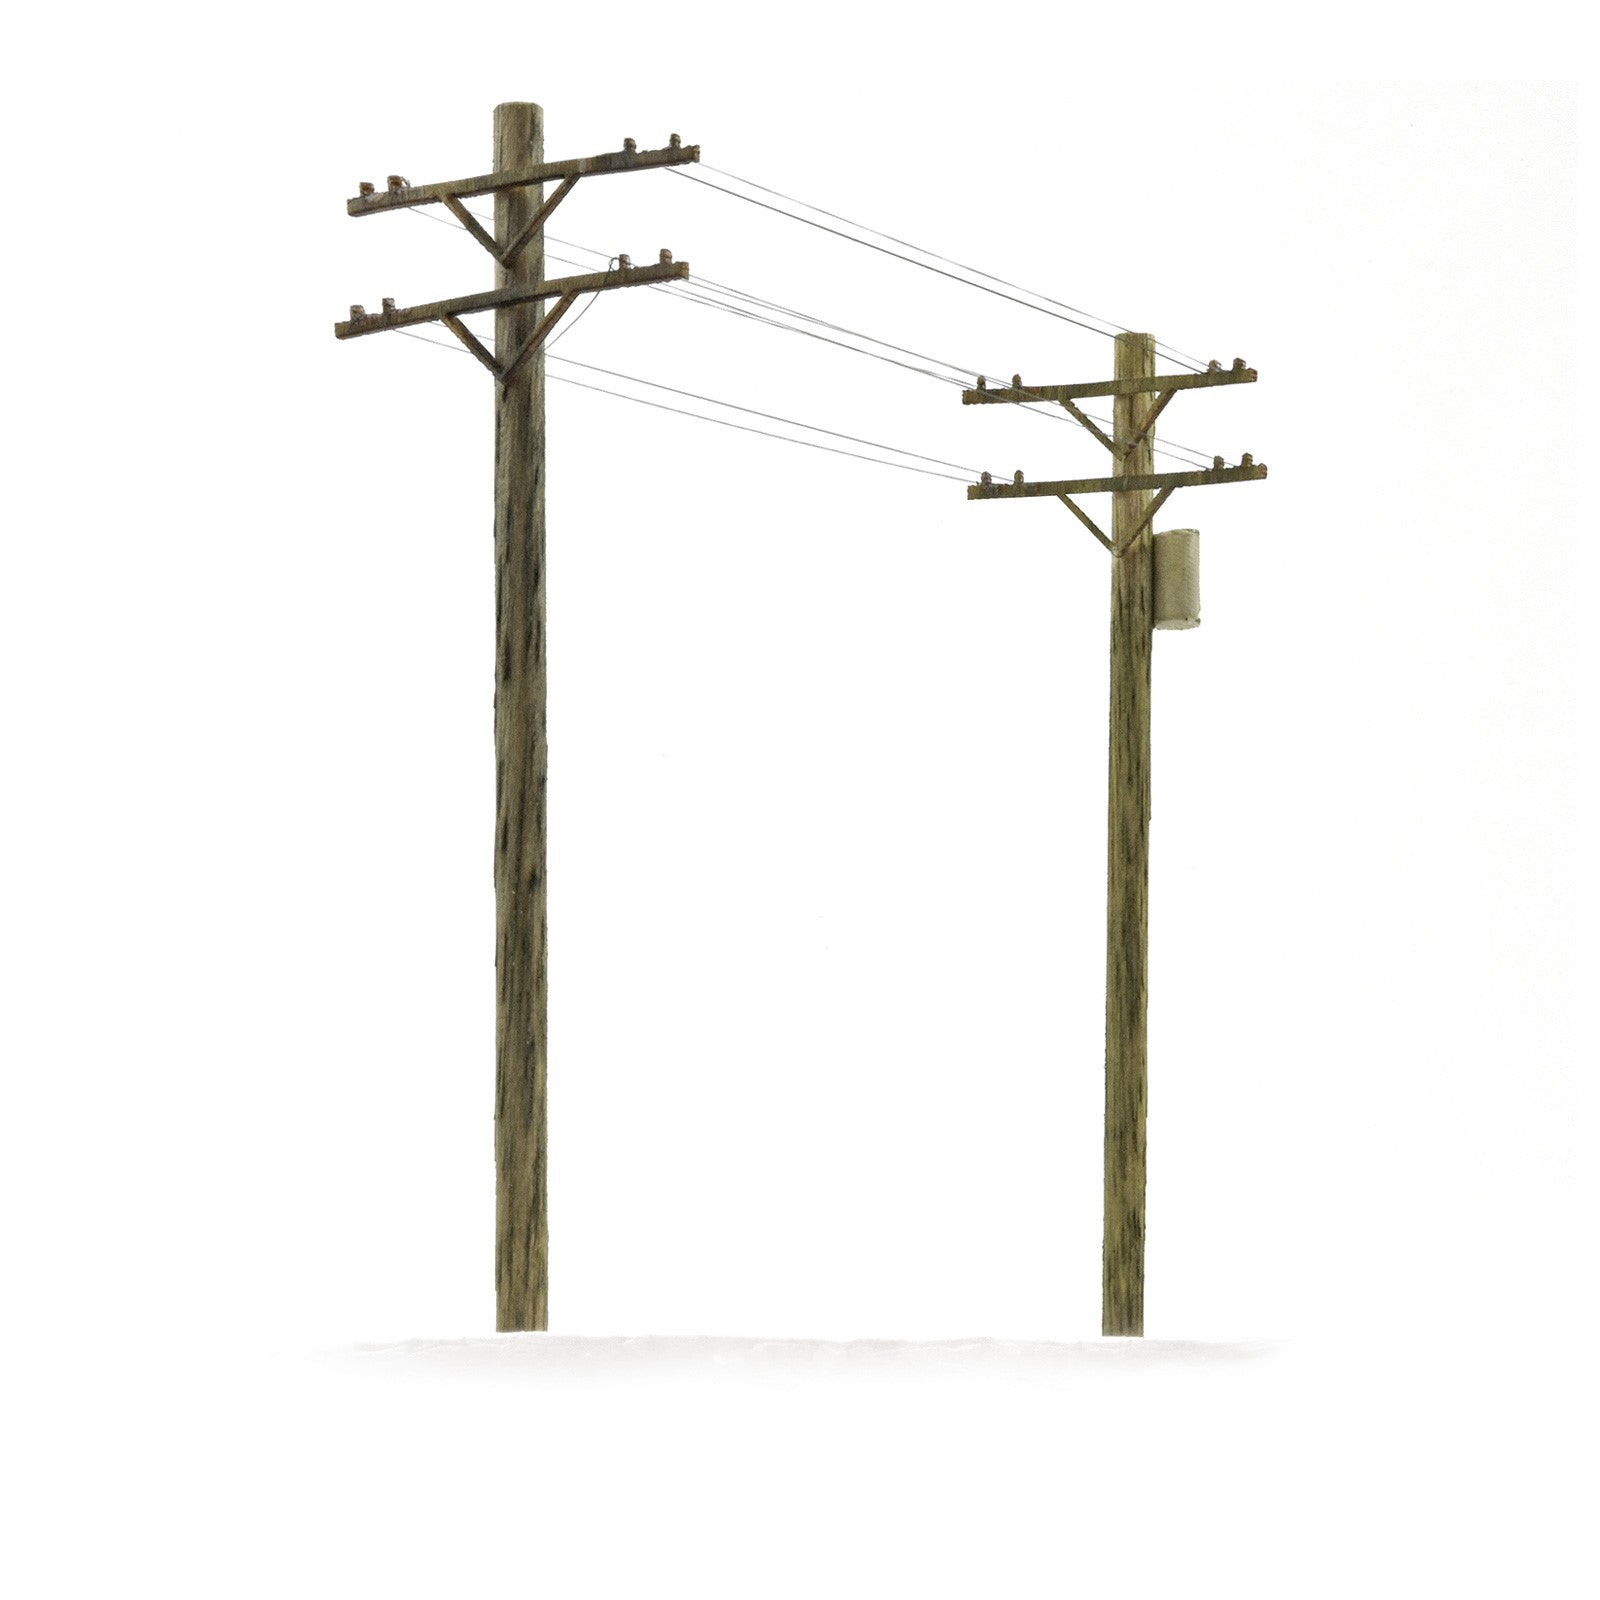 Telephone Pole Kit, HO Scale, By Scientific